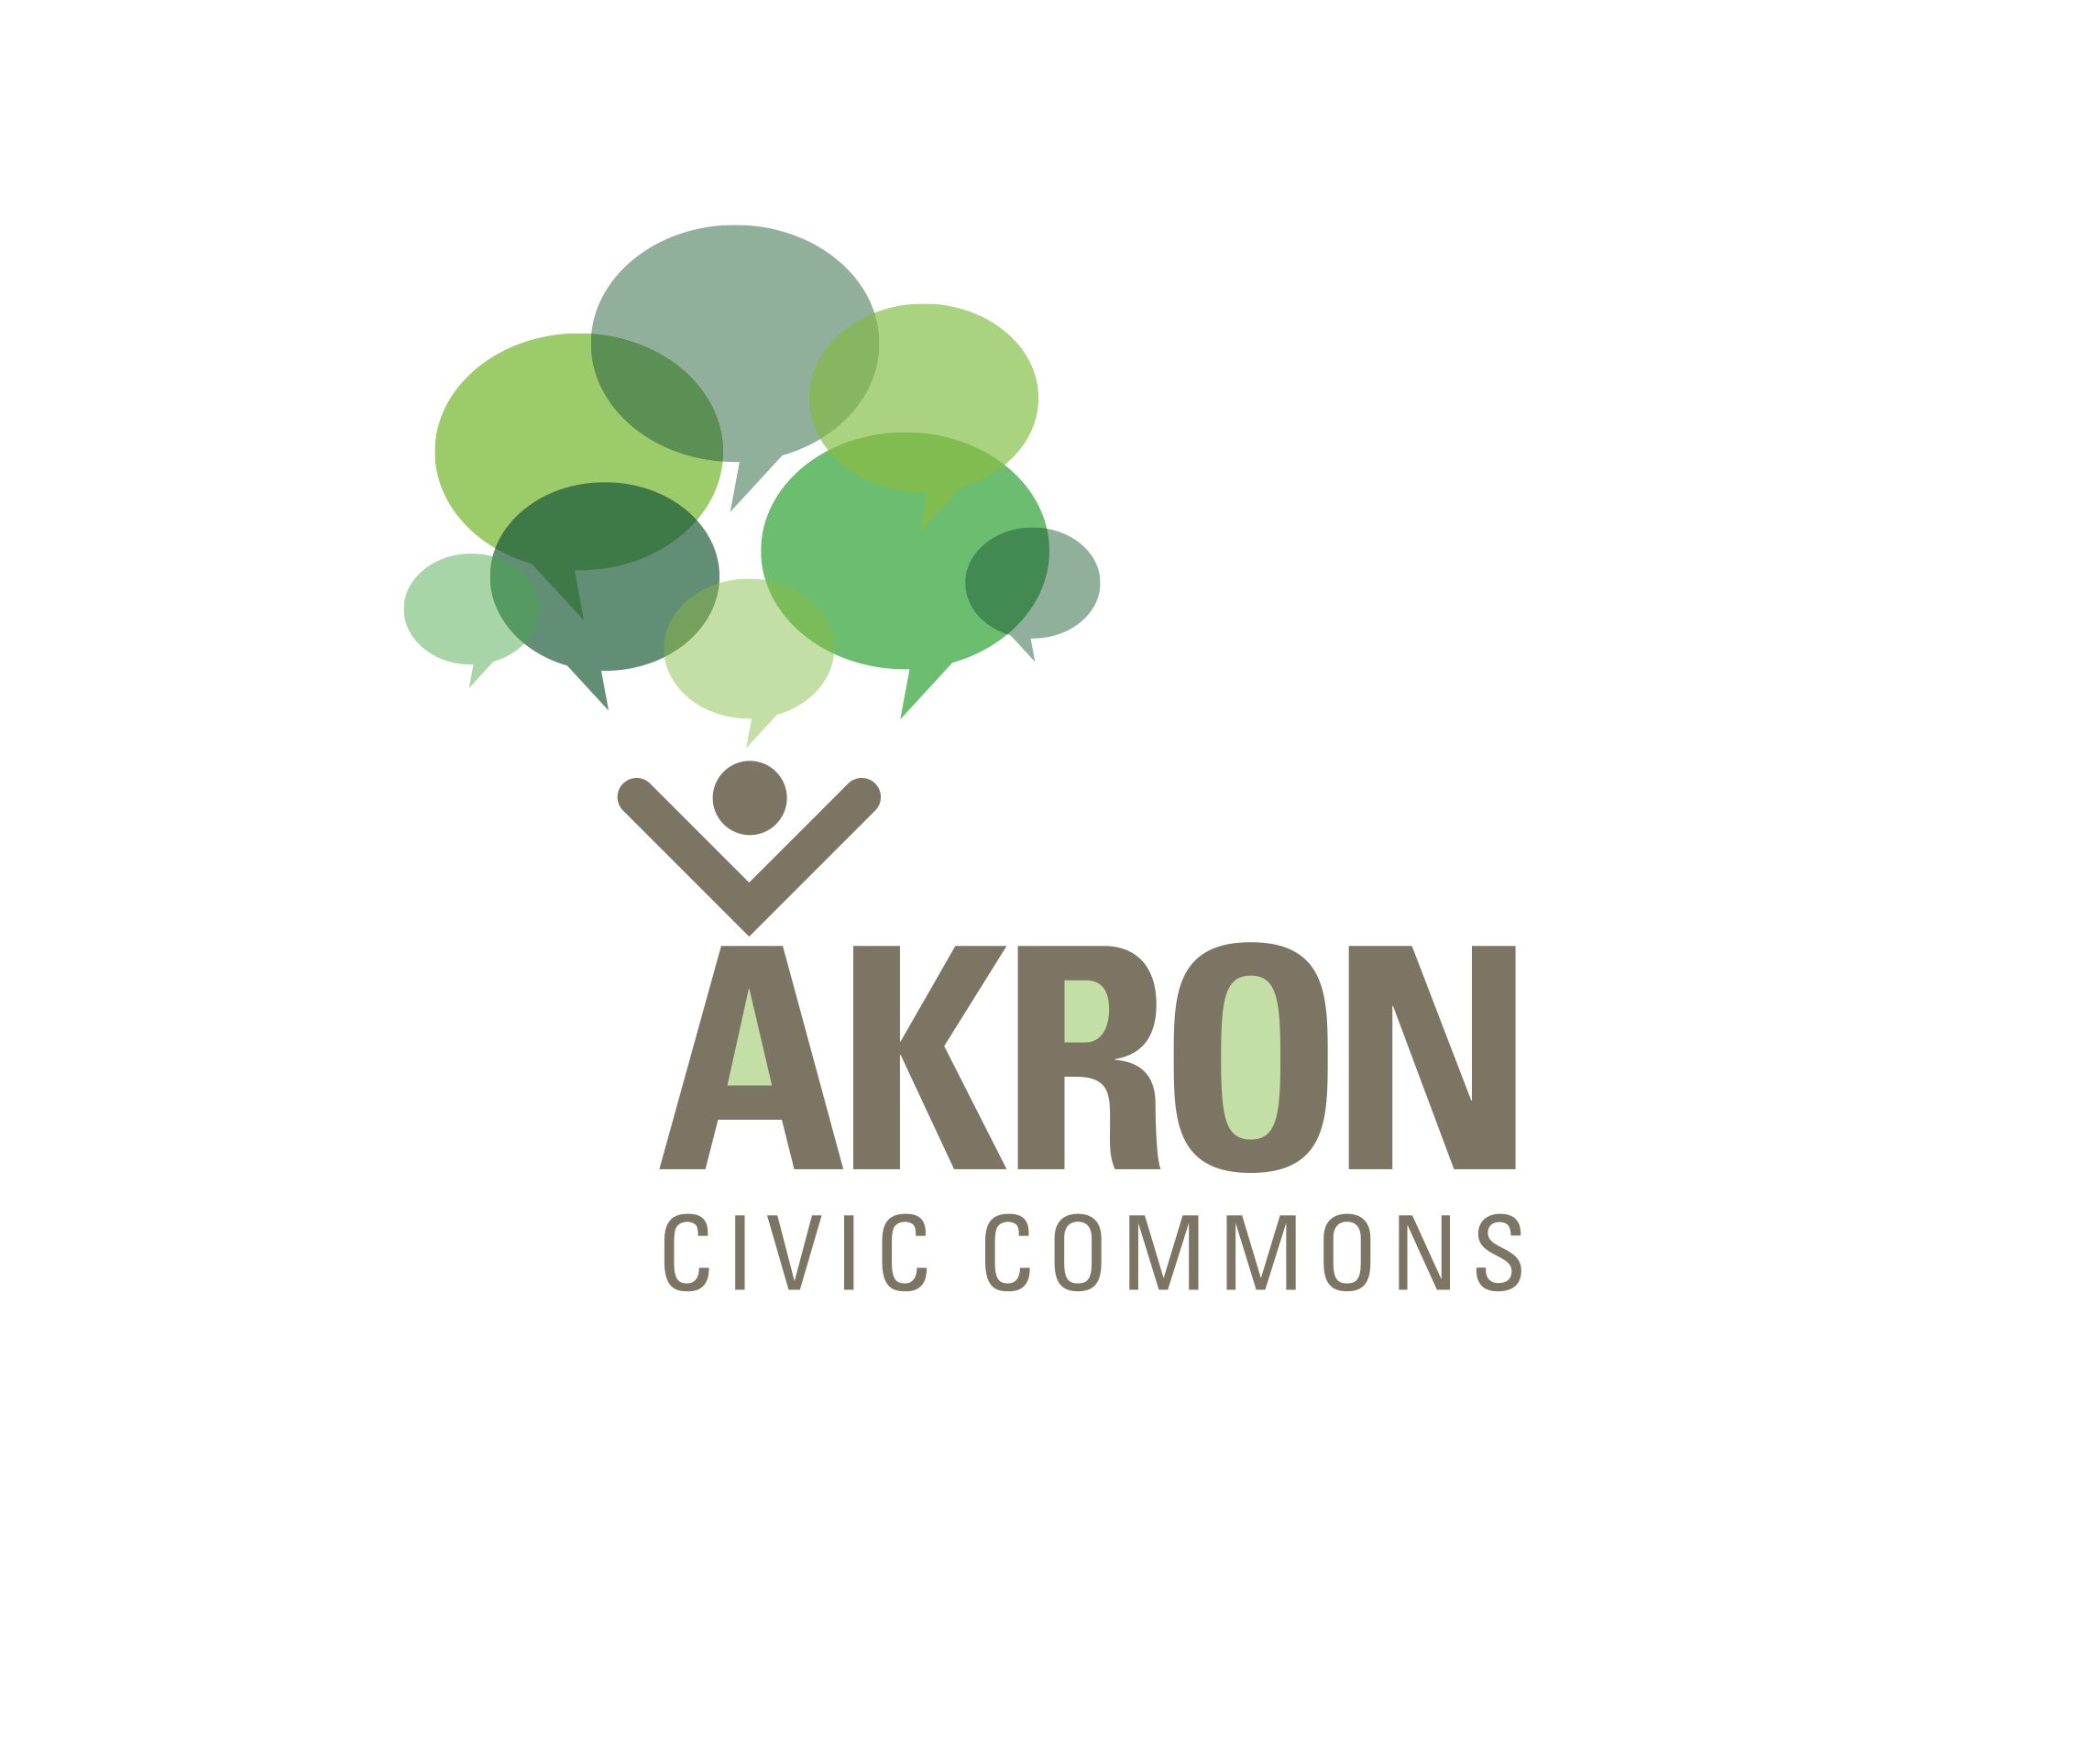 Connecting & bringing economically diverse neighborhoods together, building civic pride and advancing environmental sustainability in Akron.